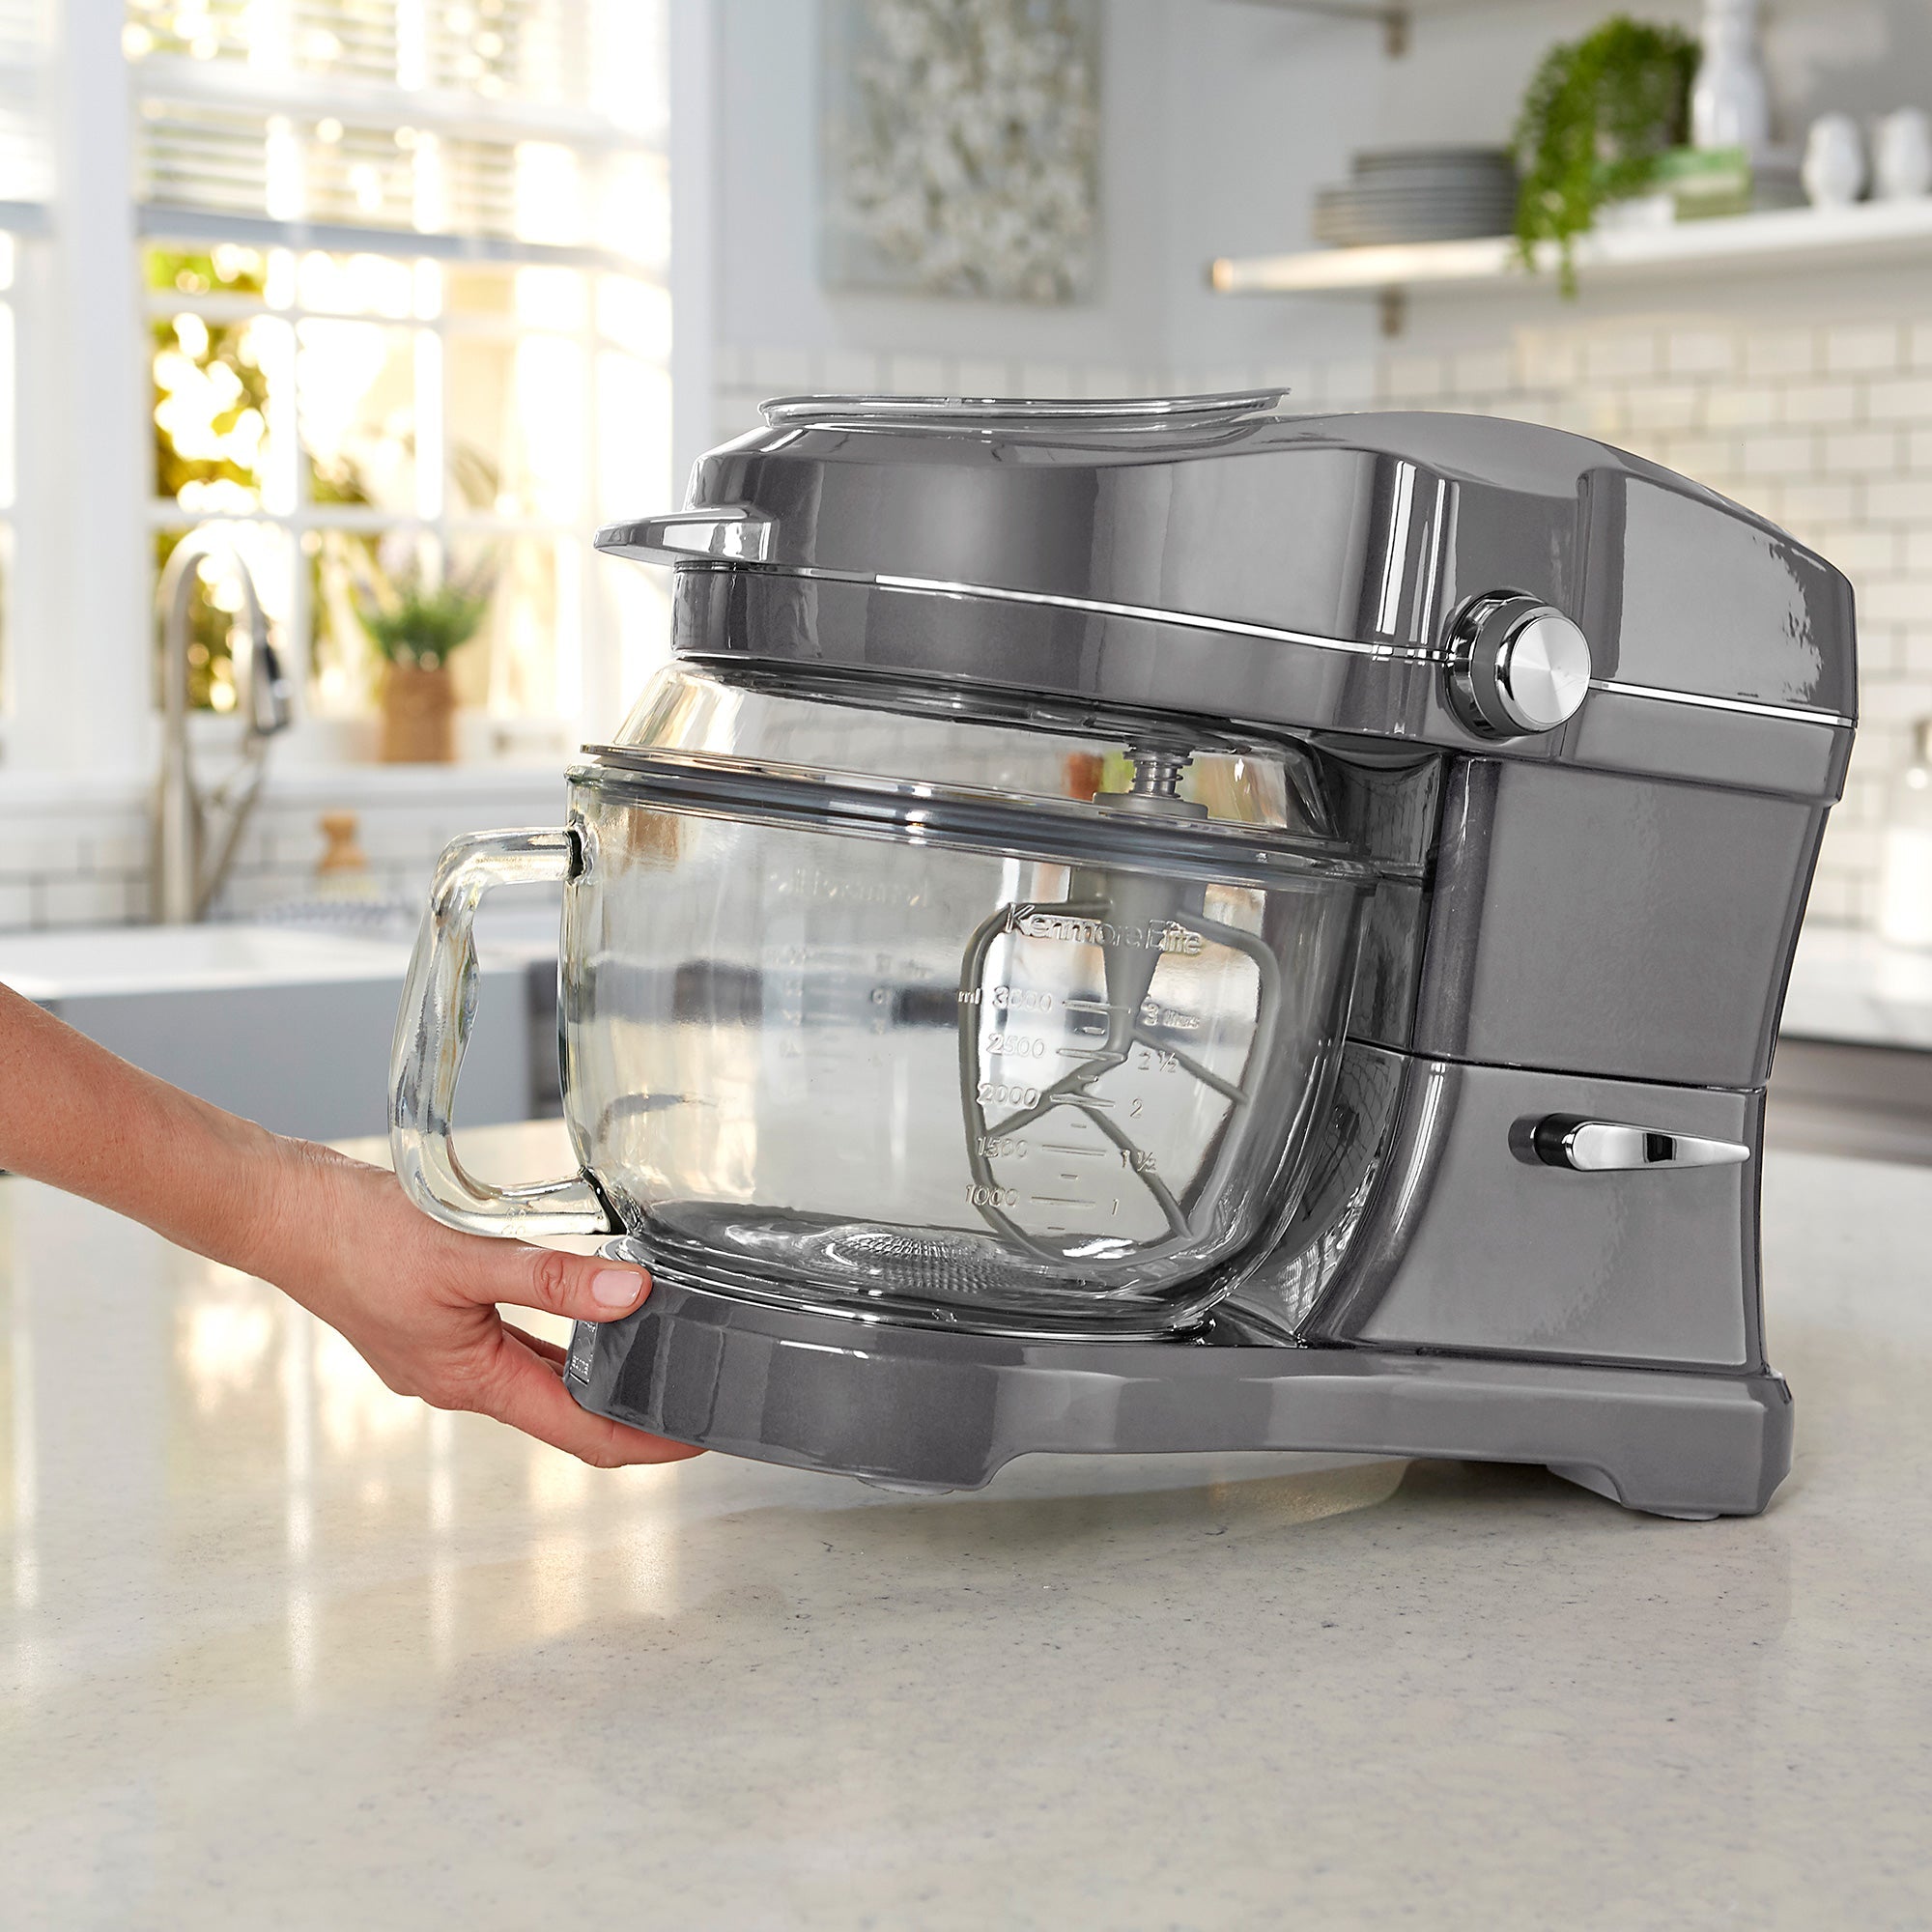 A person's hand tilting the Kenmore Elite Ovation stand mixer to move it using the tilt-and-glide feature across a light-colored kitchen counter with cupboards in the background